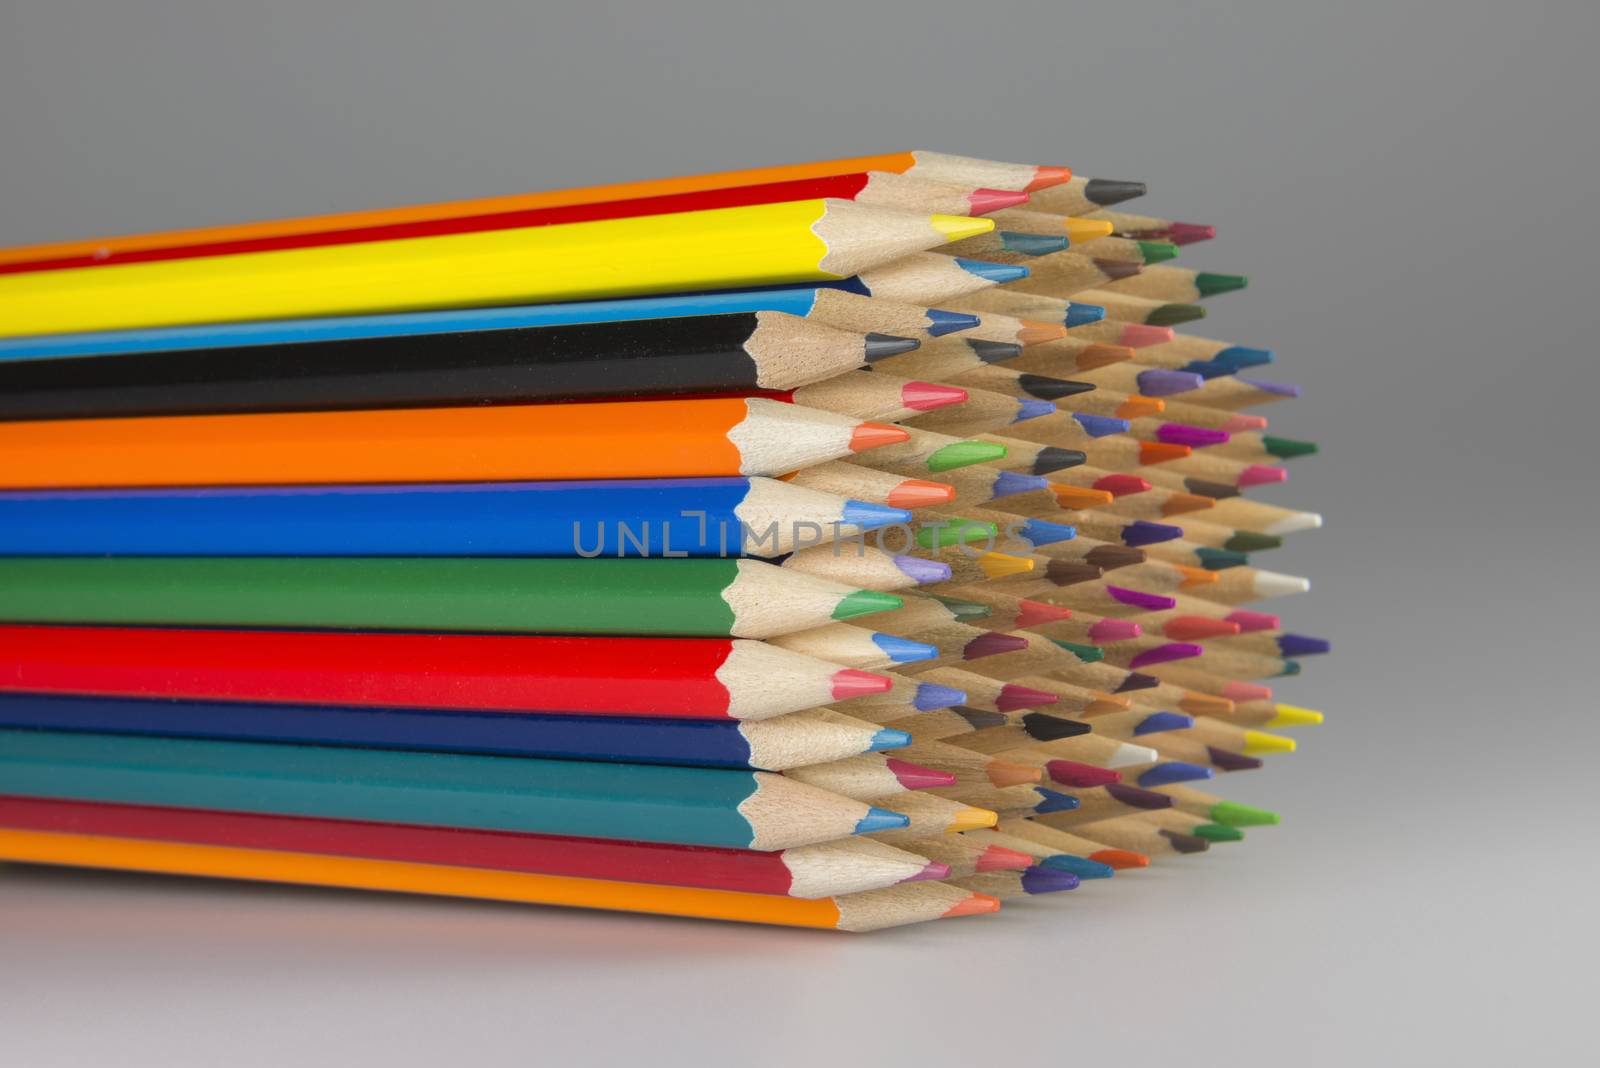 collection of colored wooden pencils
 by Tofotografie